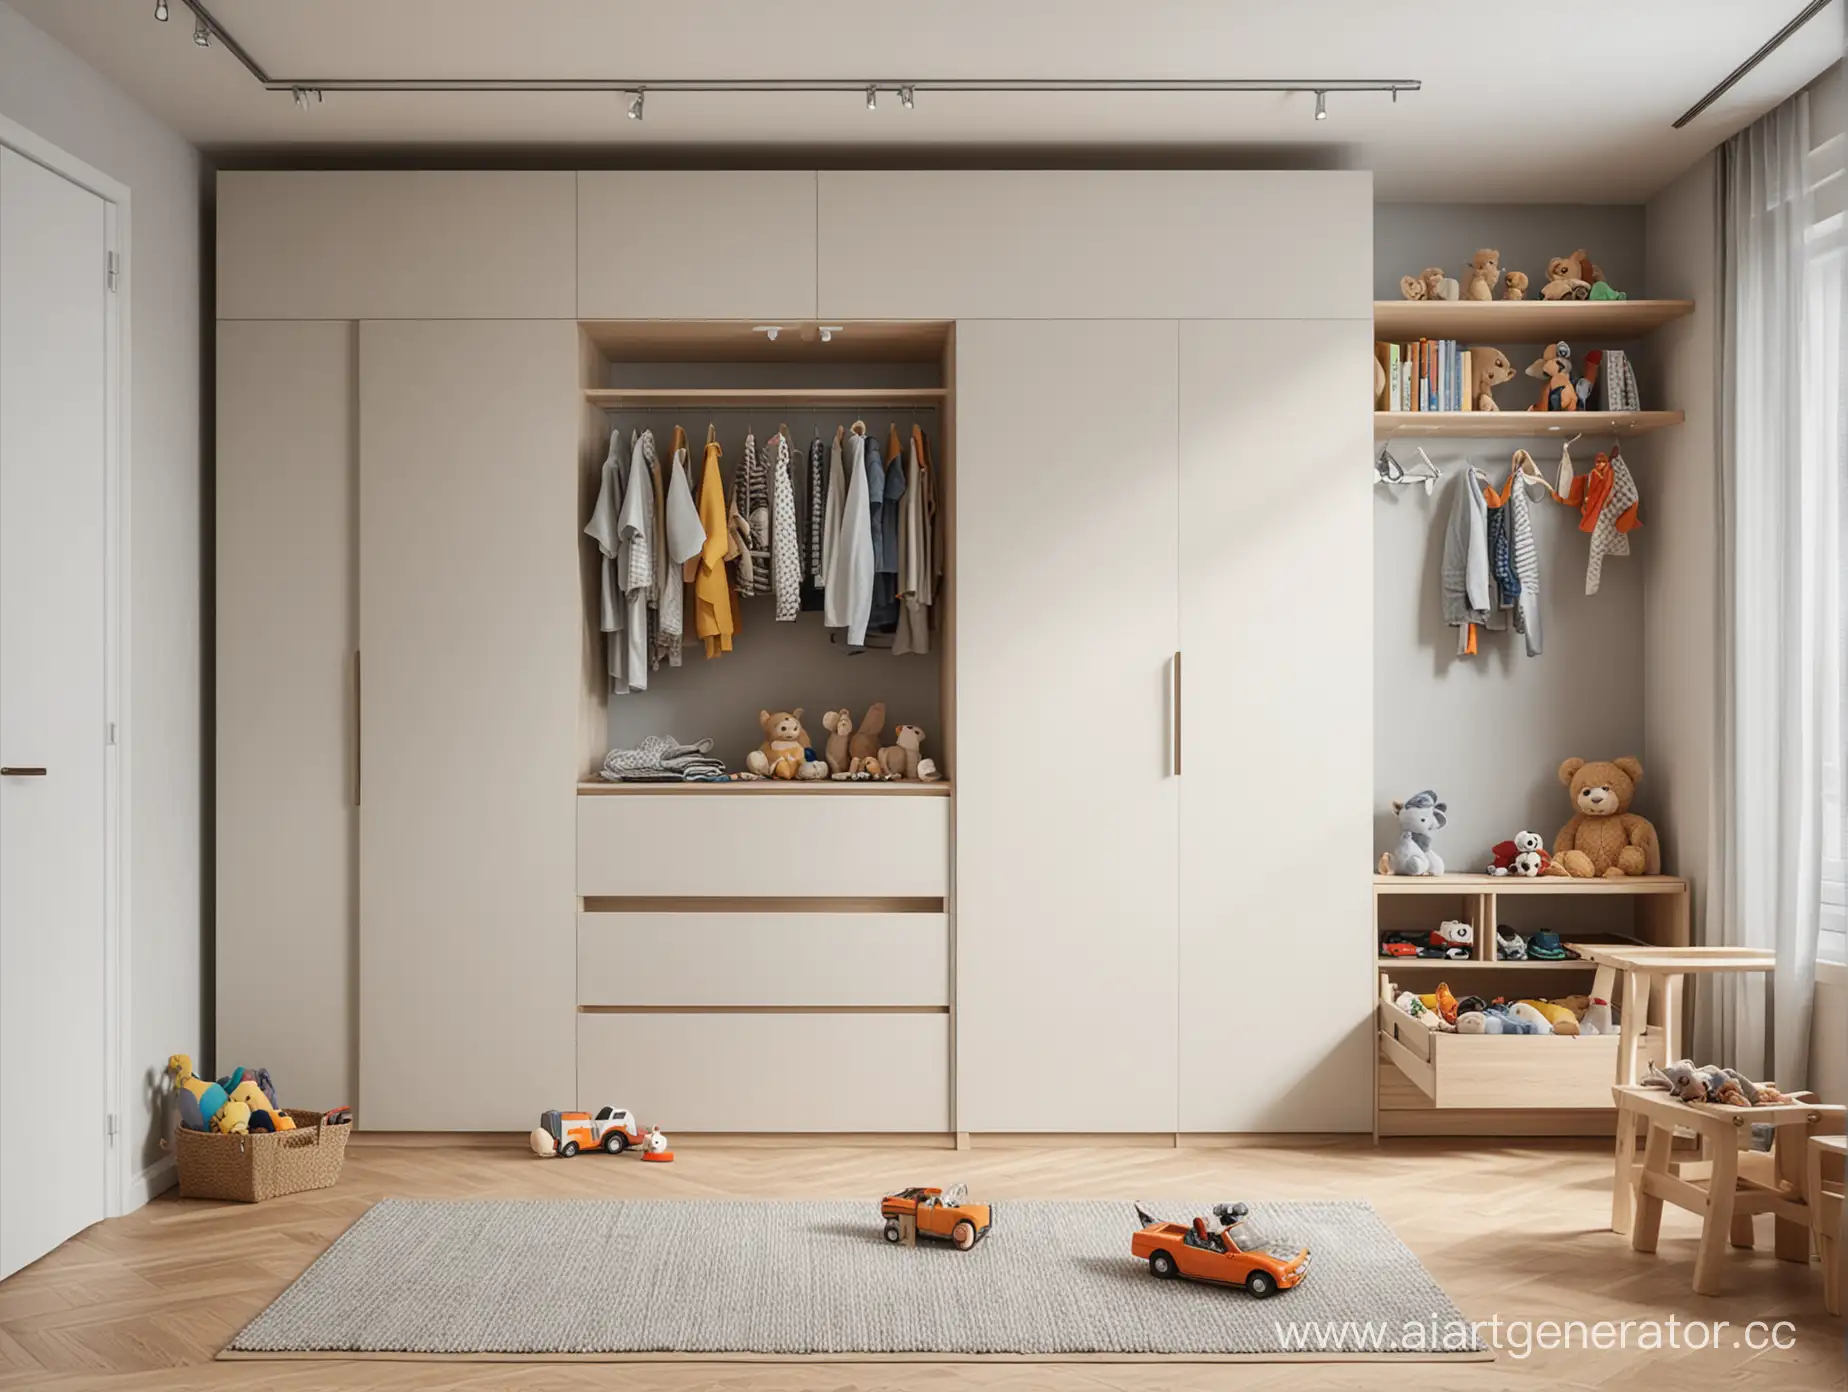 Modern-Childrens-Room-Wardrobe-with-Toys